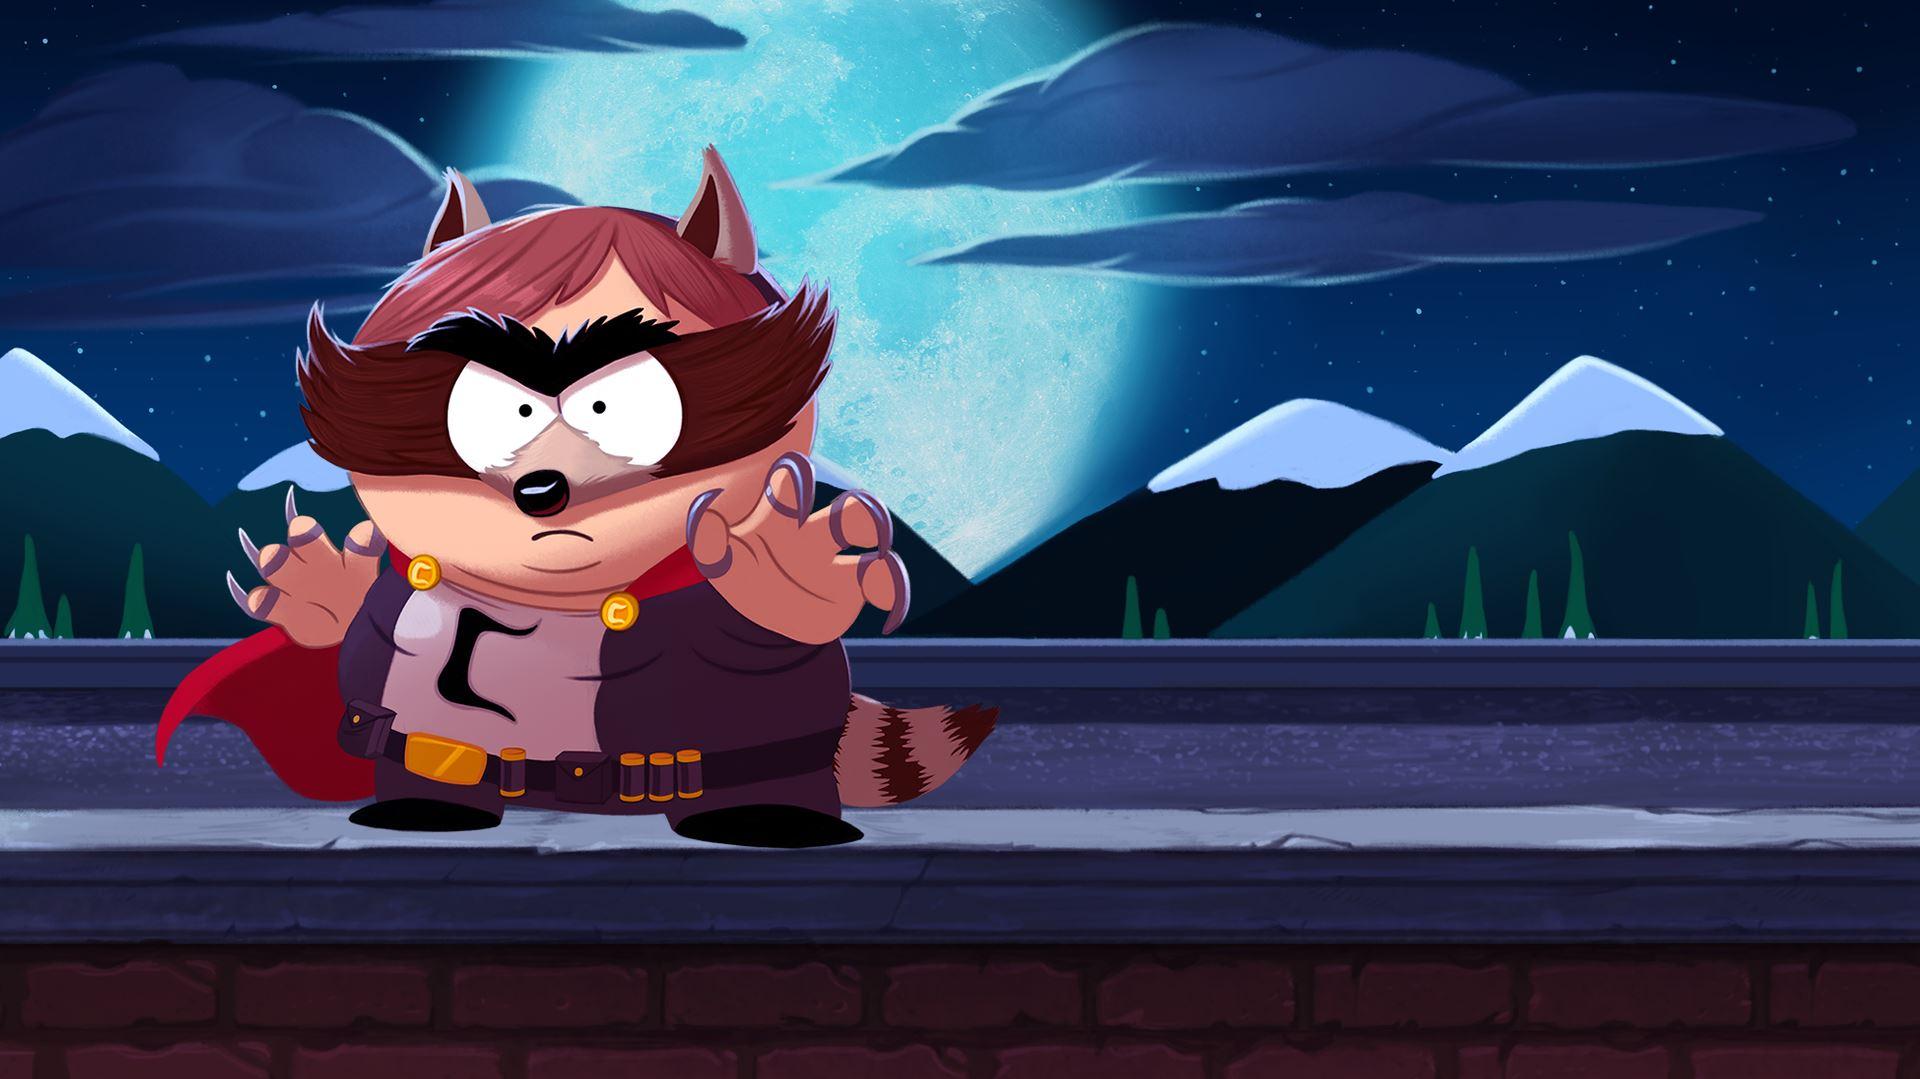 Download The Coon South Park wallpapers for mobile phone free